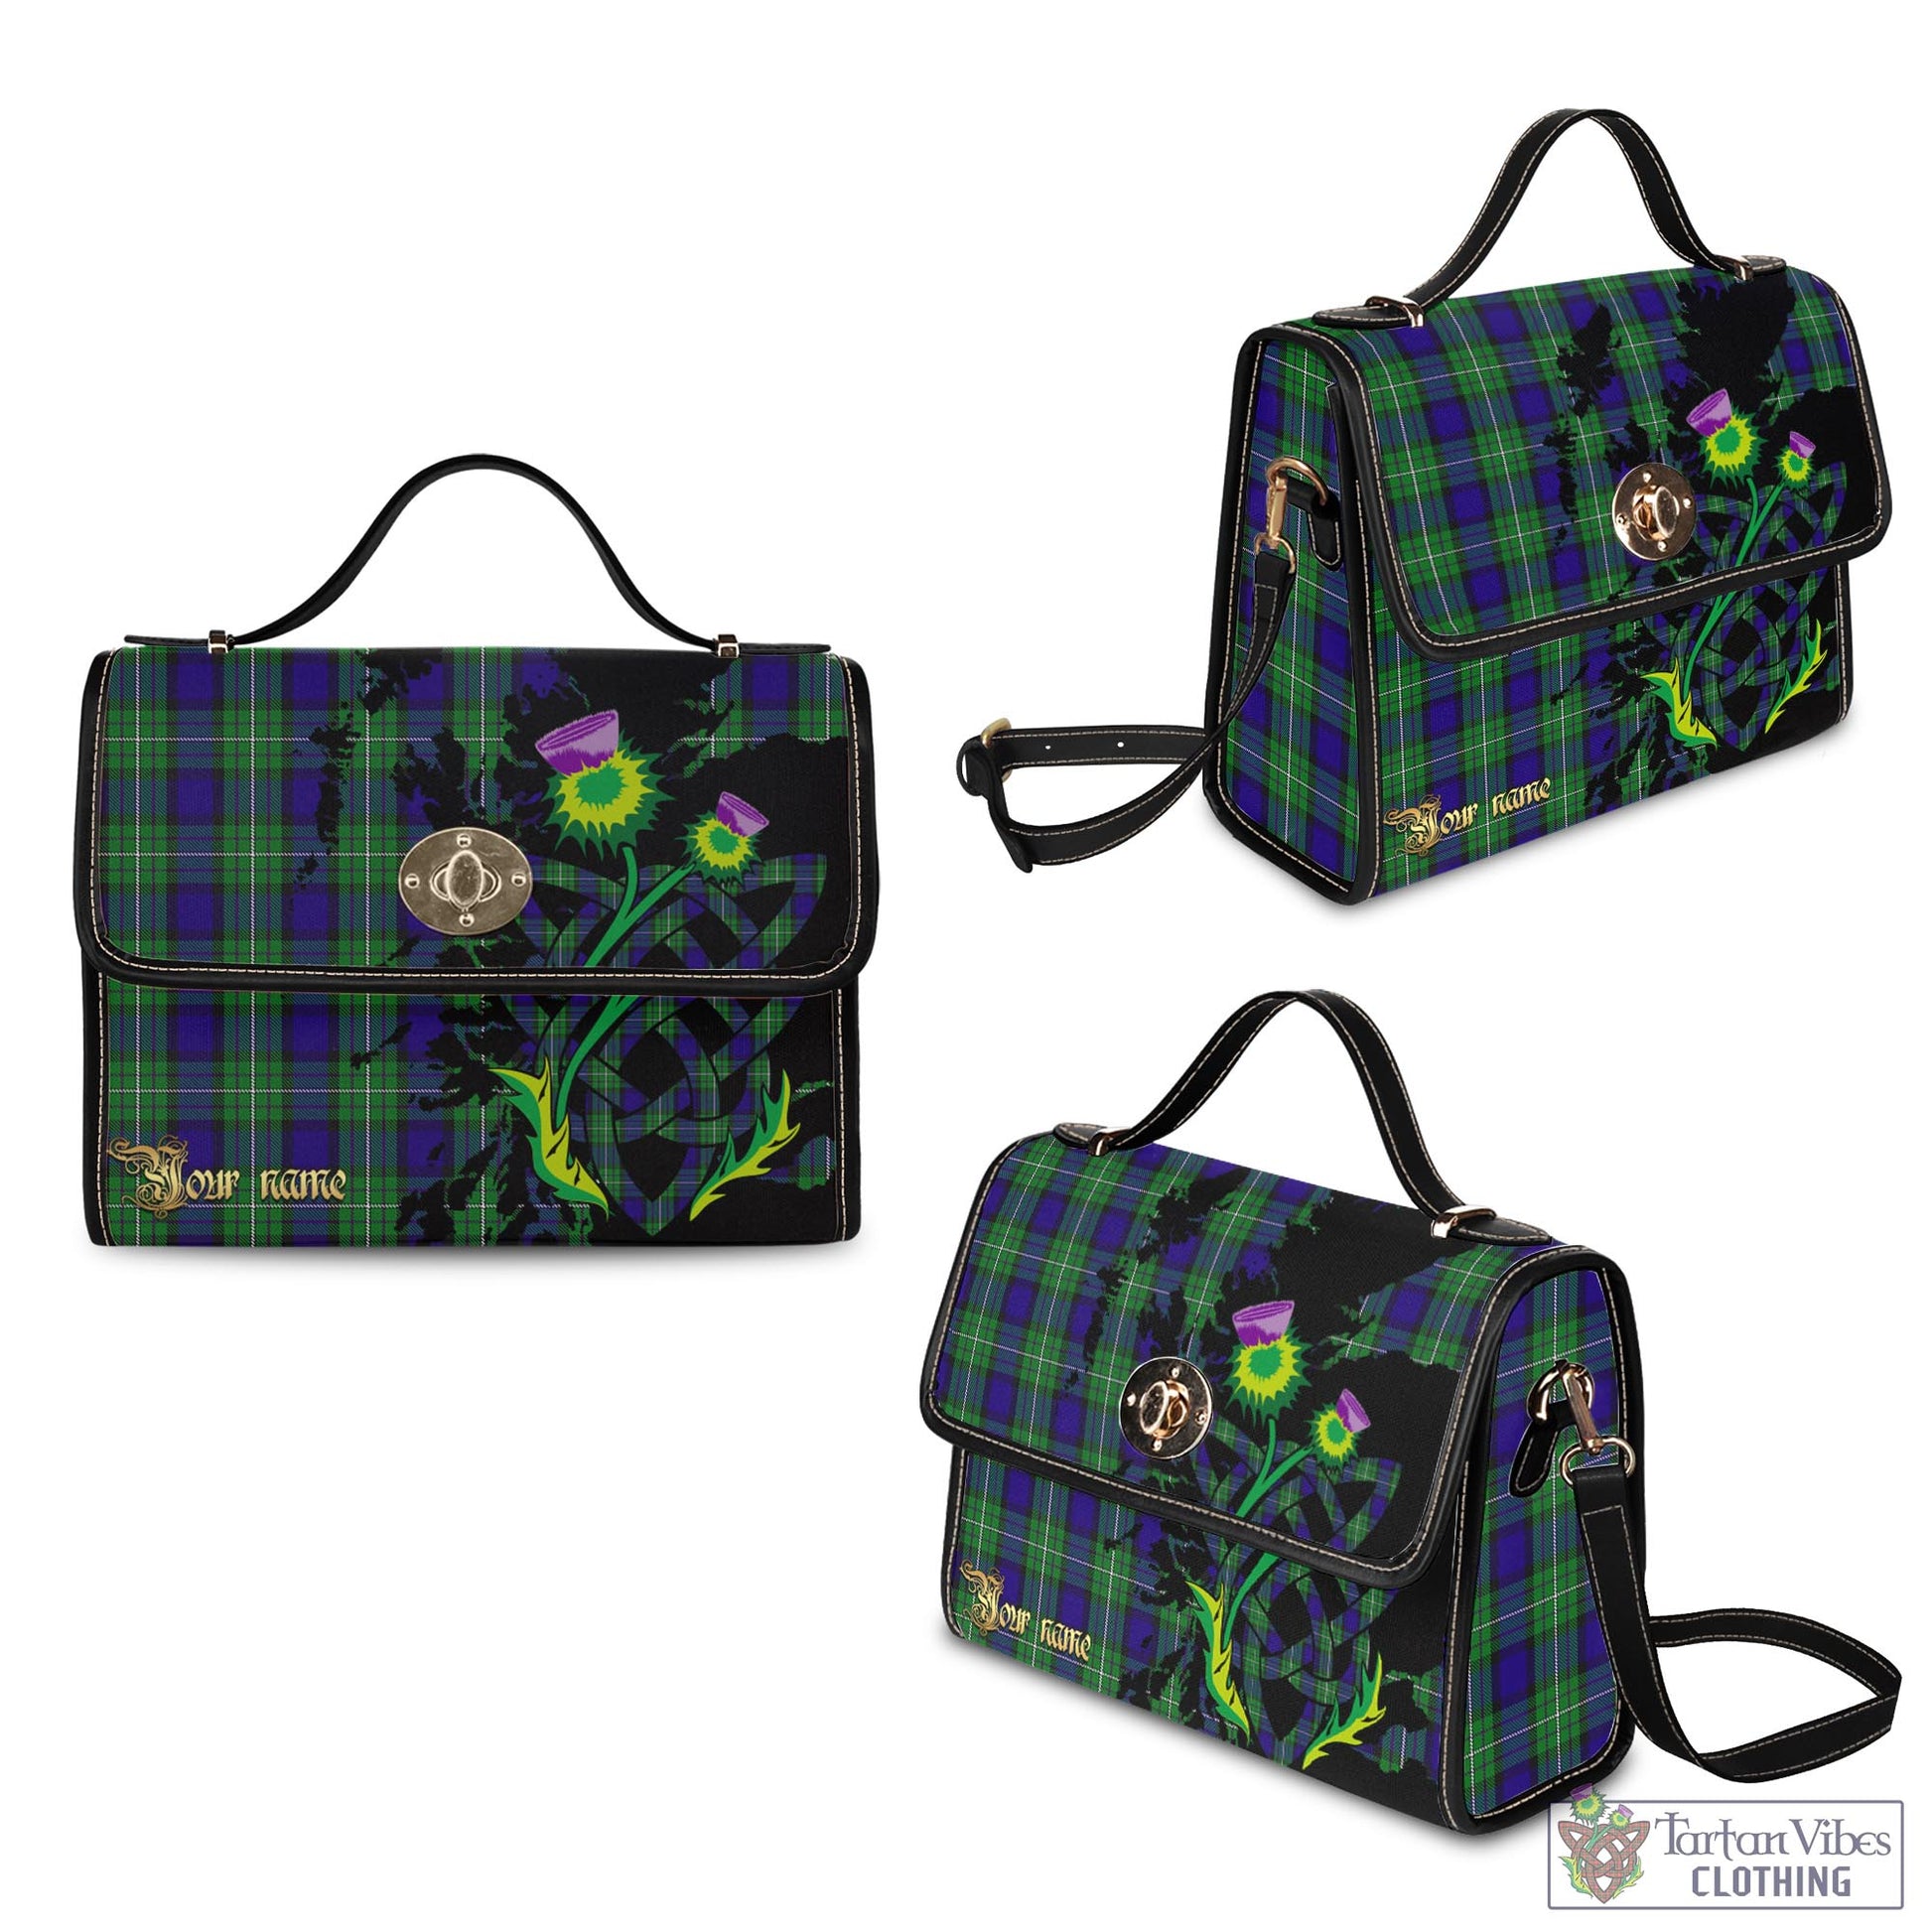 Tartan Vibes Clothing Alexander Tartan Waterproof Canvas Bag with Scotland Map and Thistle Celtic Accents